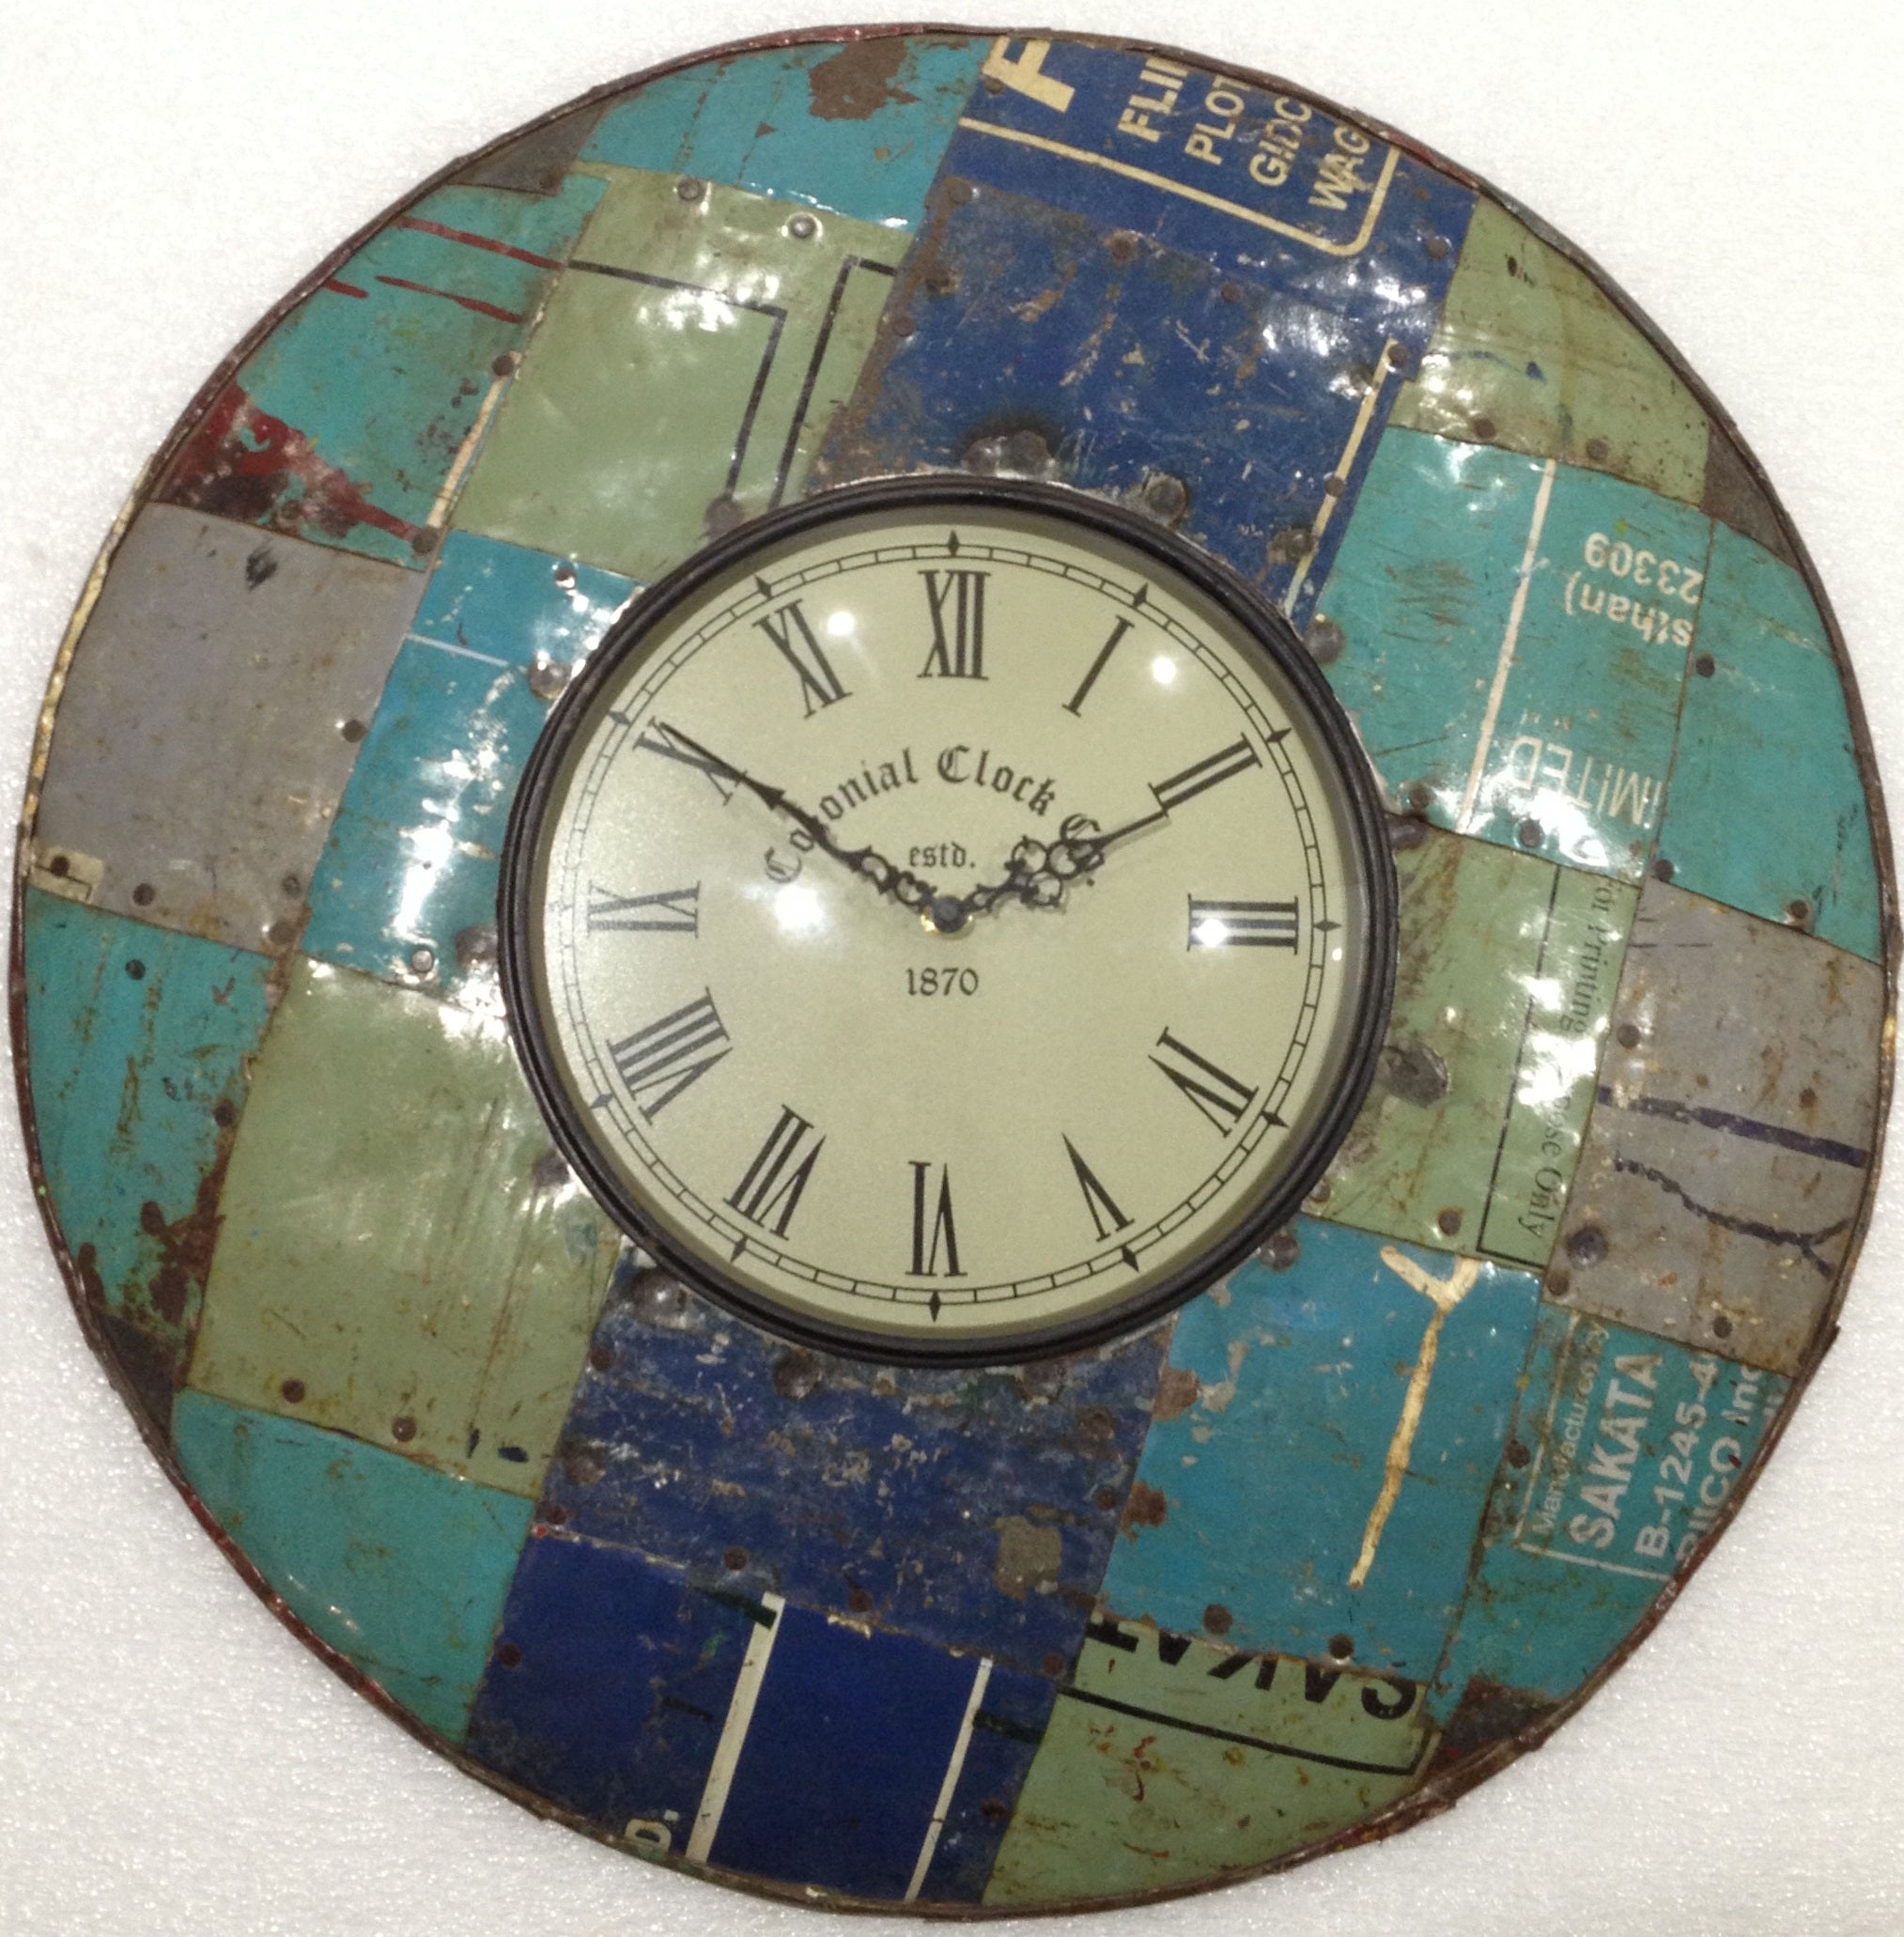 Vintage RUSTIC Industrial Round Metal Wall Clock | eXibit collection